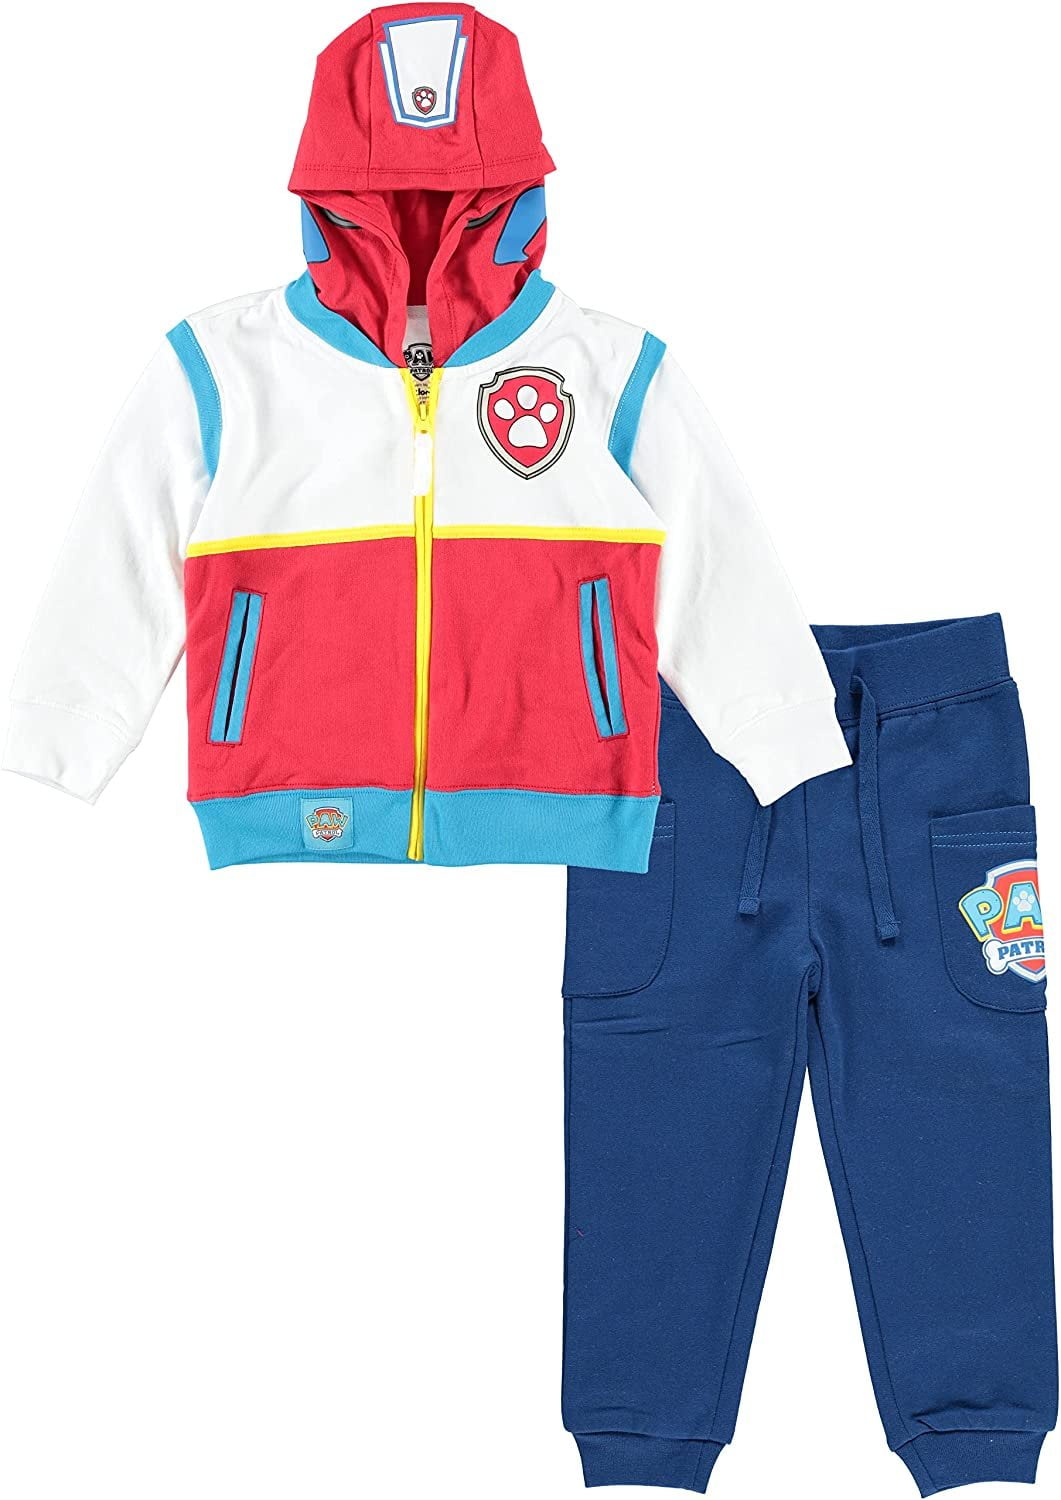 ADULT Paw Patrol inspired Ryder Costume Vests Sizes Small XXXL